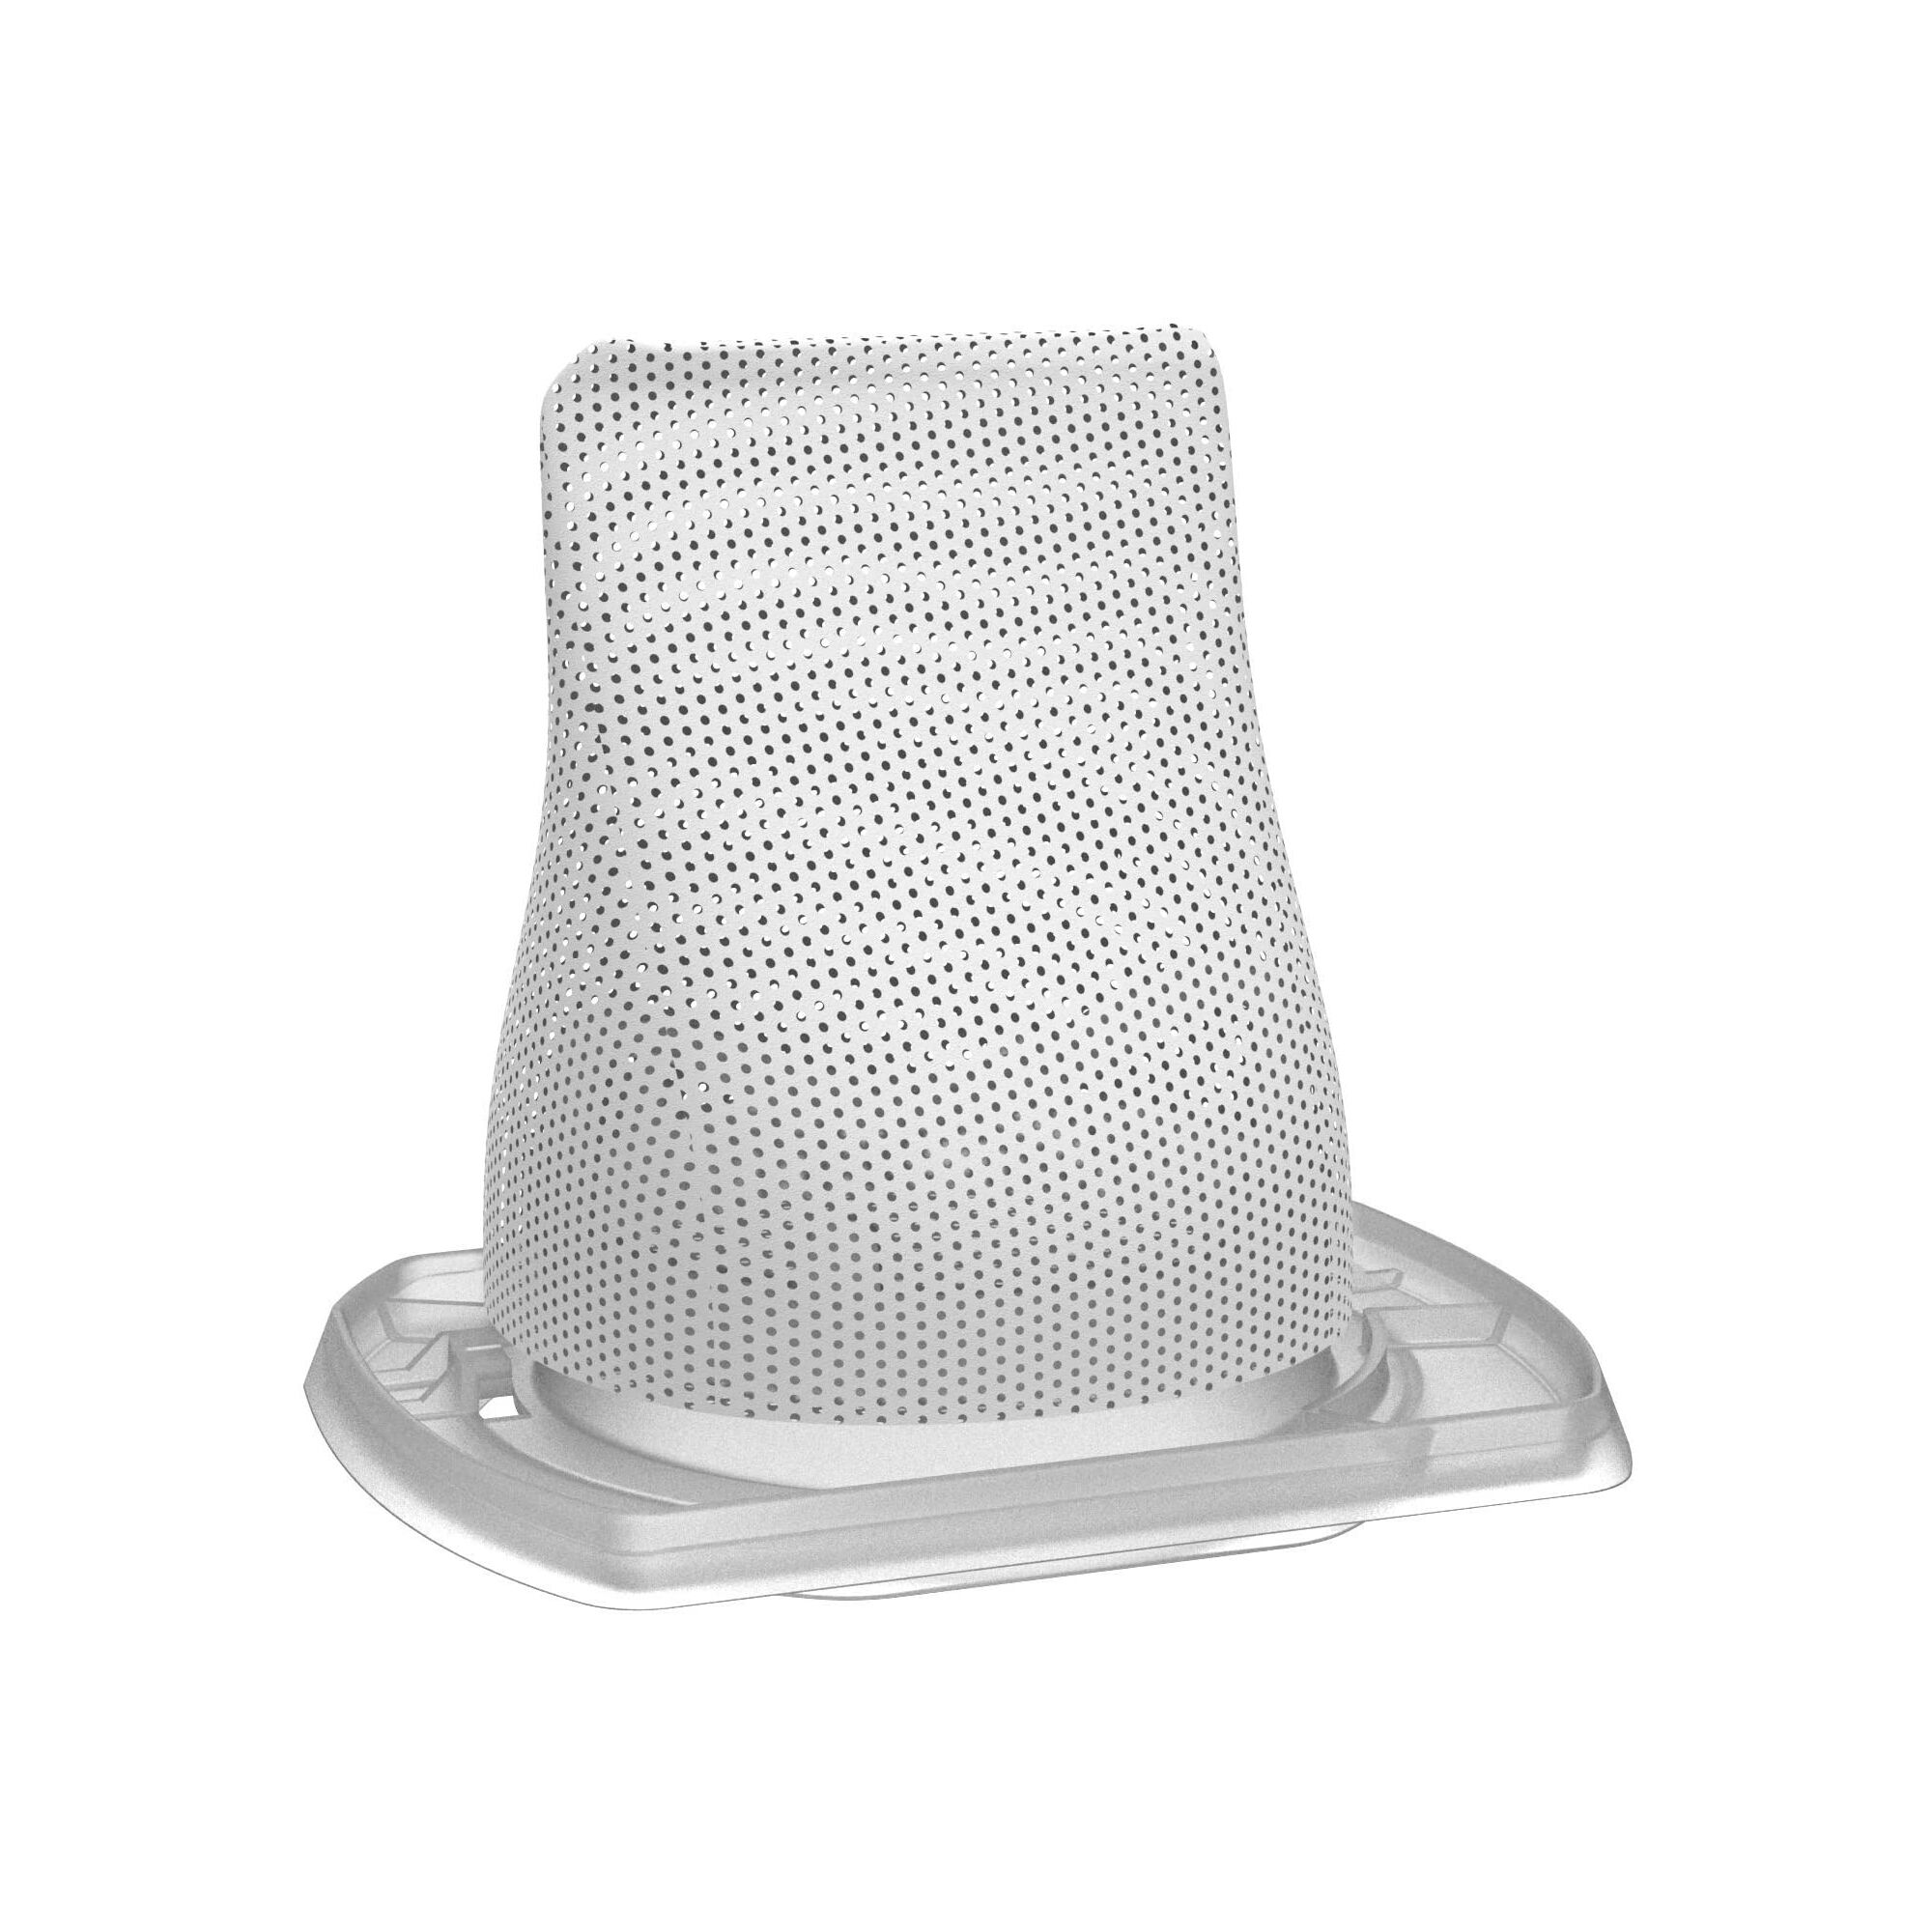 Profile of dustbuster replacement filter